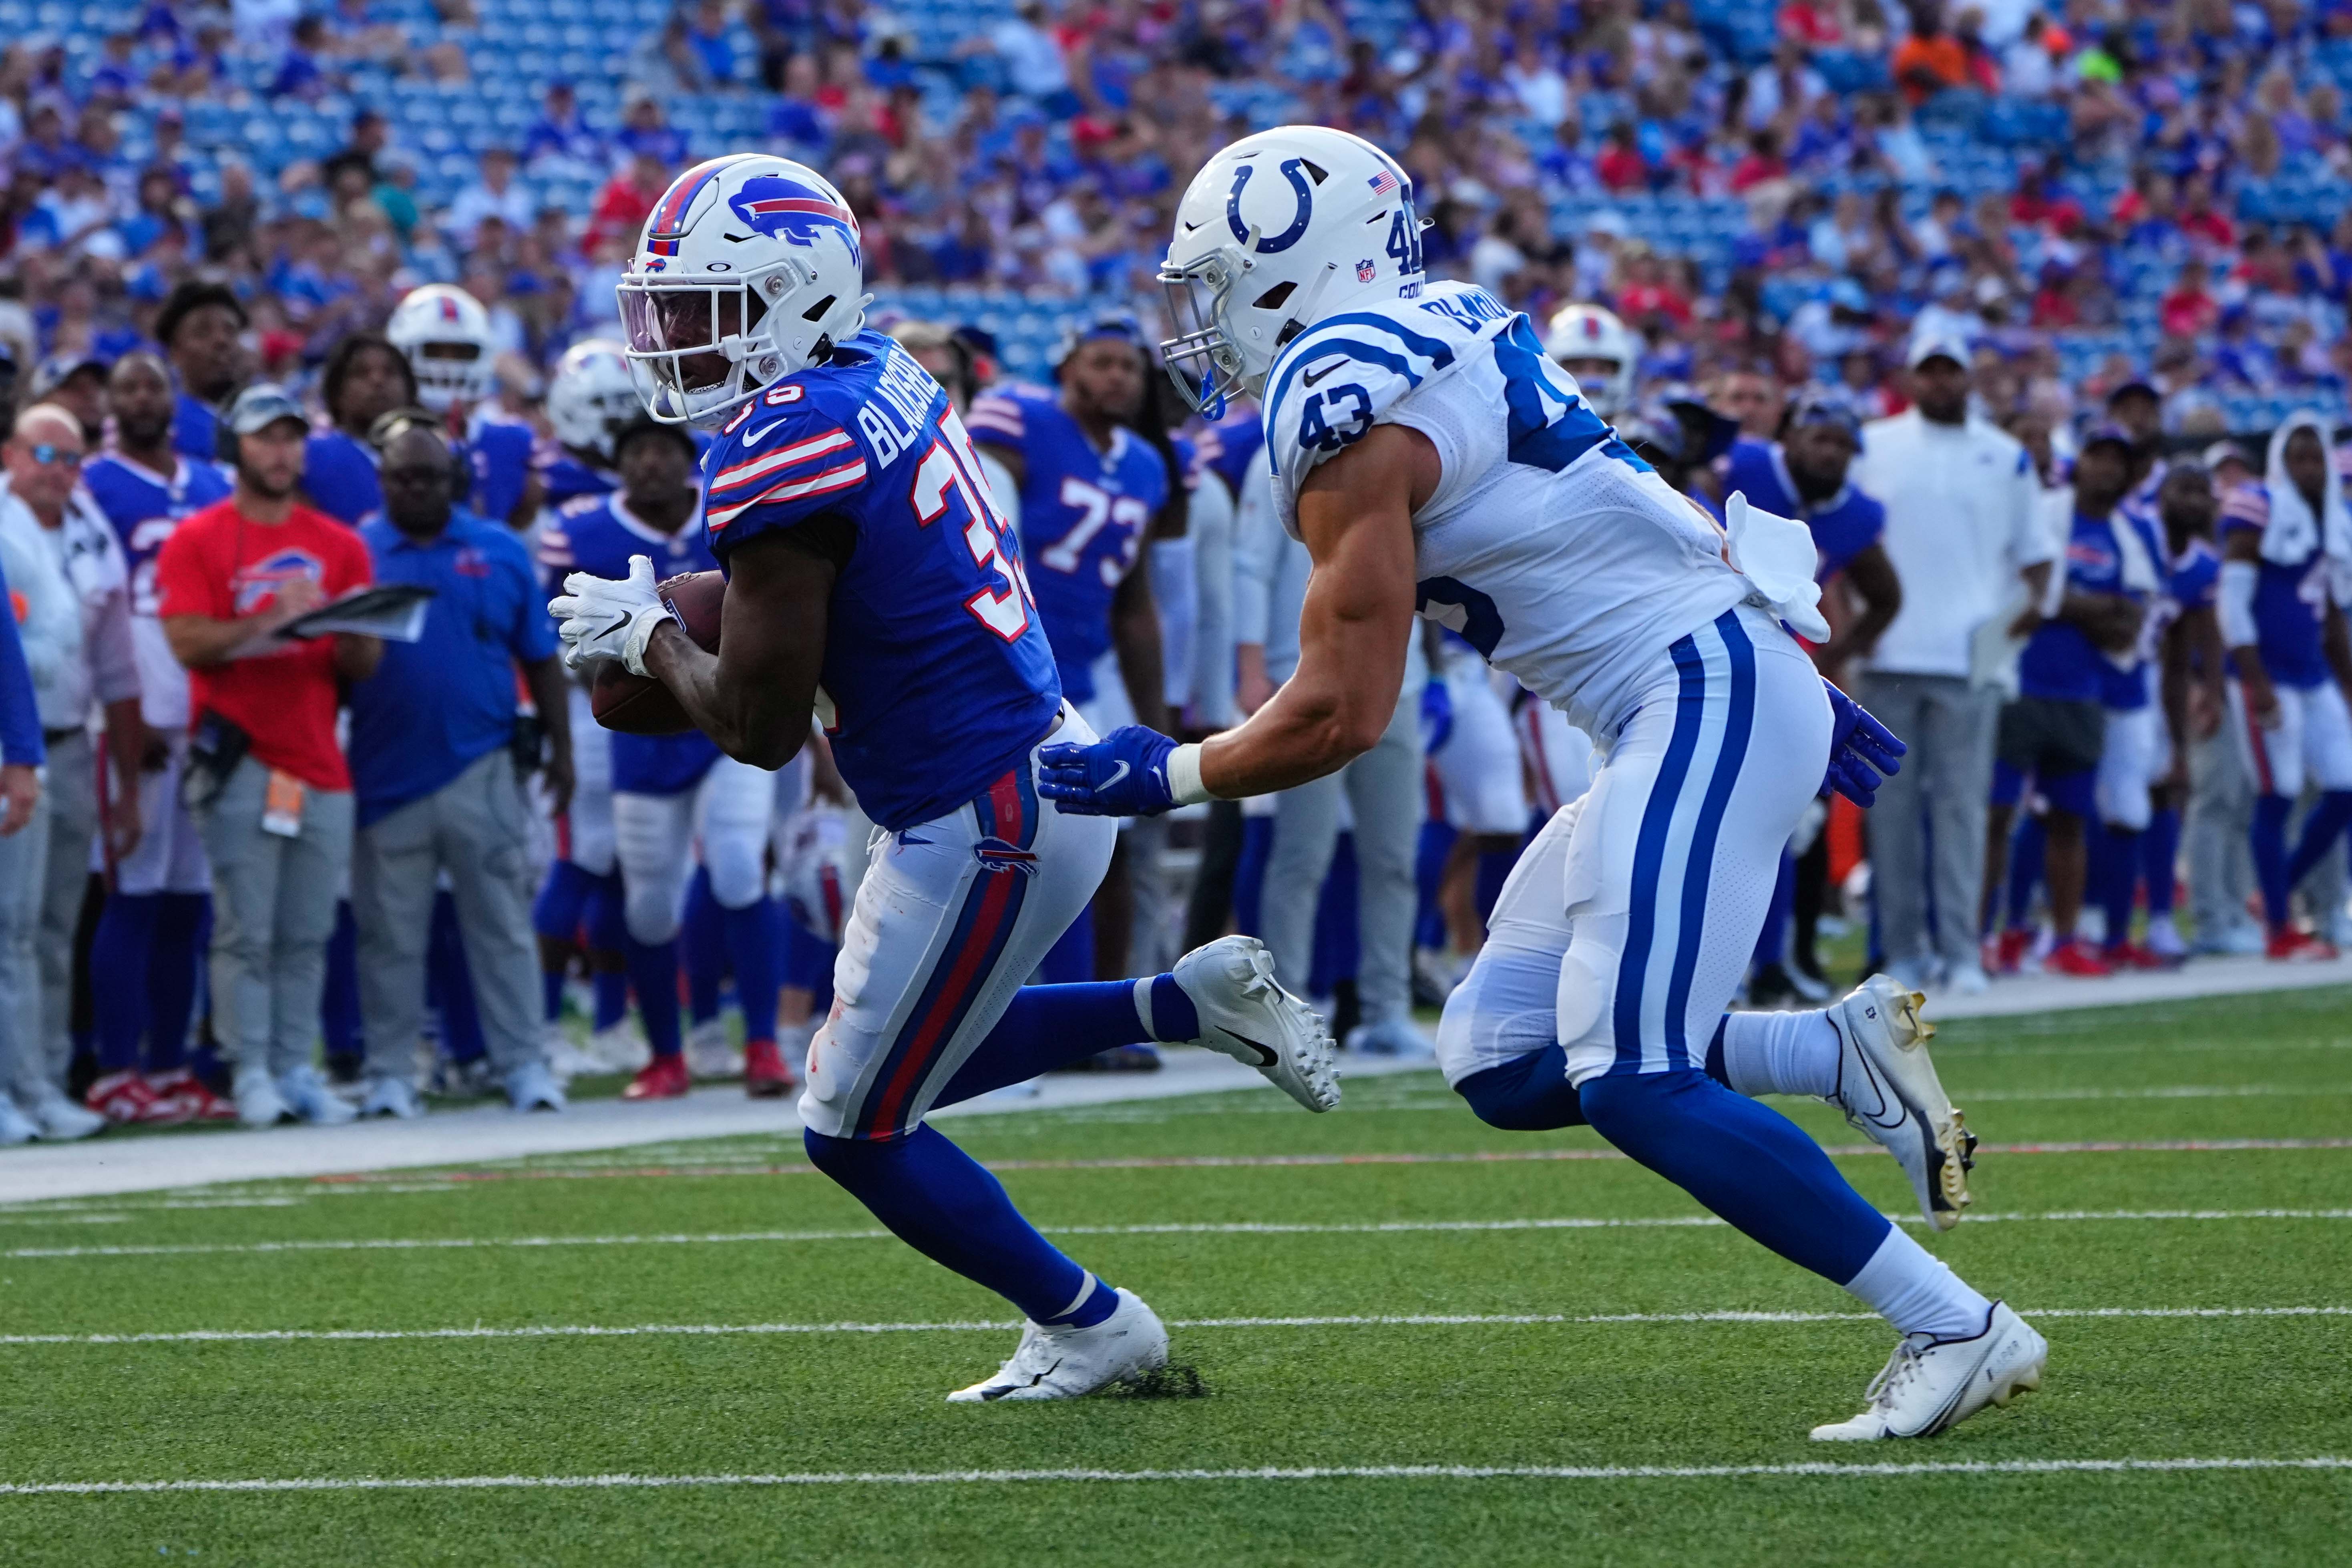 Aug 13, 2022; Orchard Park, New York, USA; Buffalo Bills running back Raheem Blackshear (35) makes a catch with Indianapolis Colts safety Trevor Denbow (43) defending during the second half at Highmark Stadium.